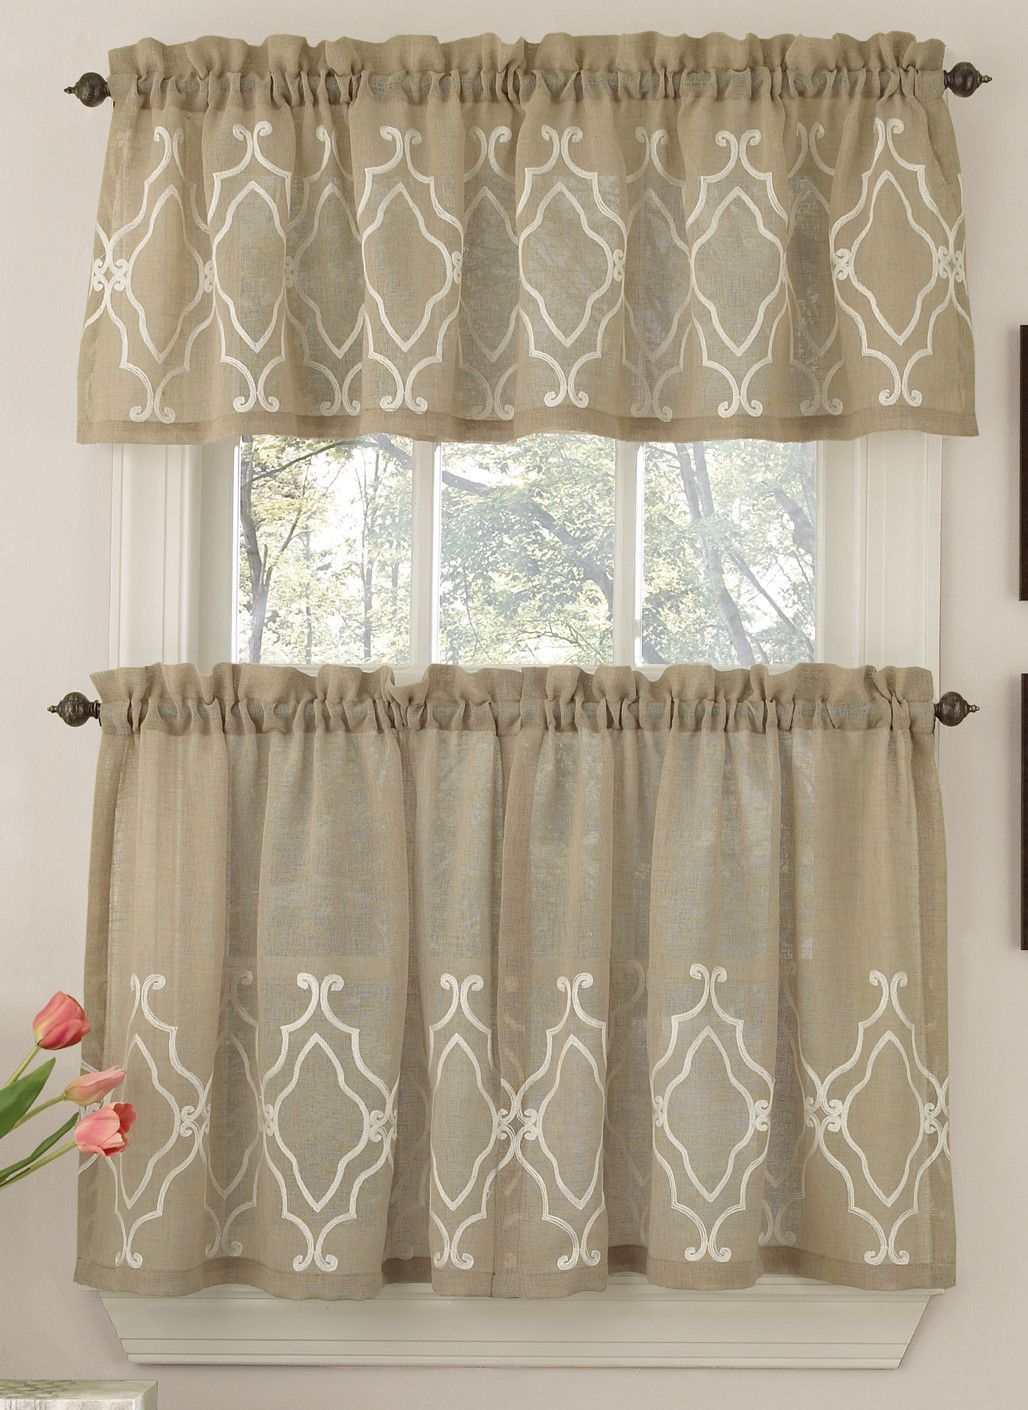 Carlyle Stitched Quatrafoil Kitchen Tier Curtains In 2019 Regarding Tailored Valance And Tier Curtains (Photo 8 of 20)